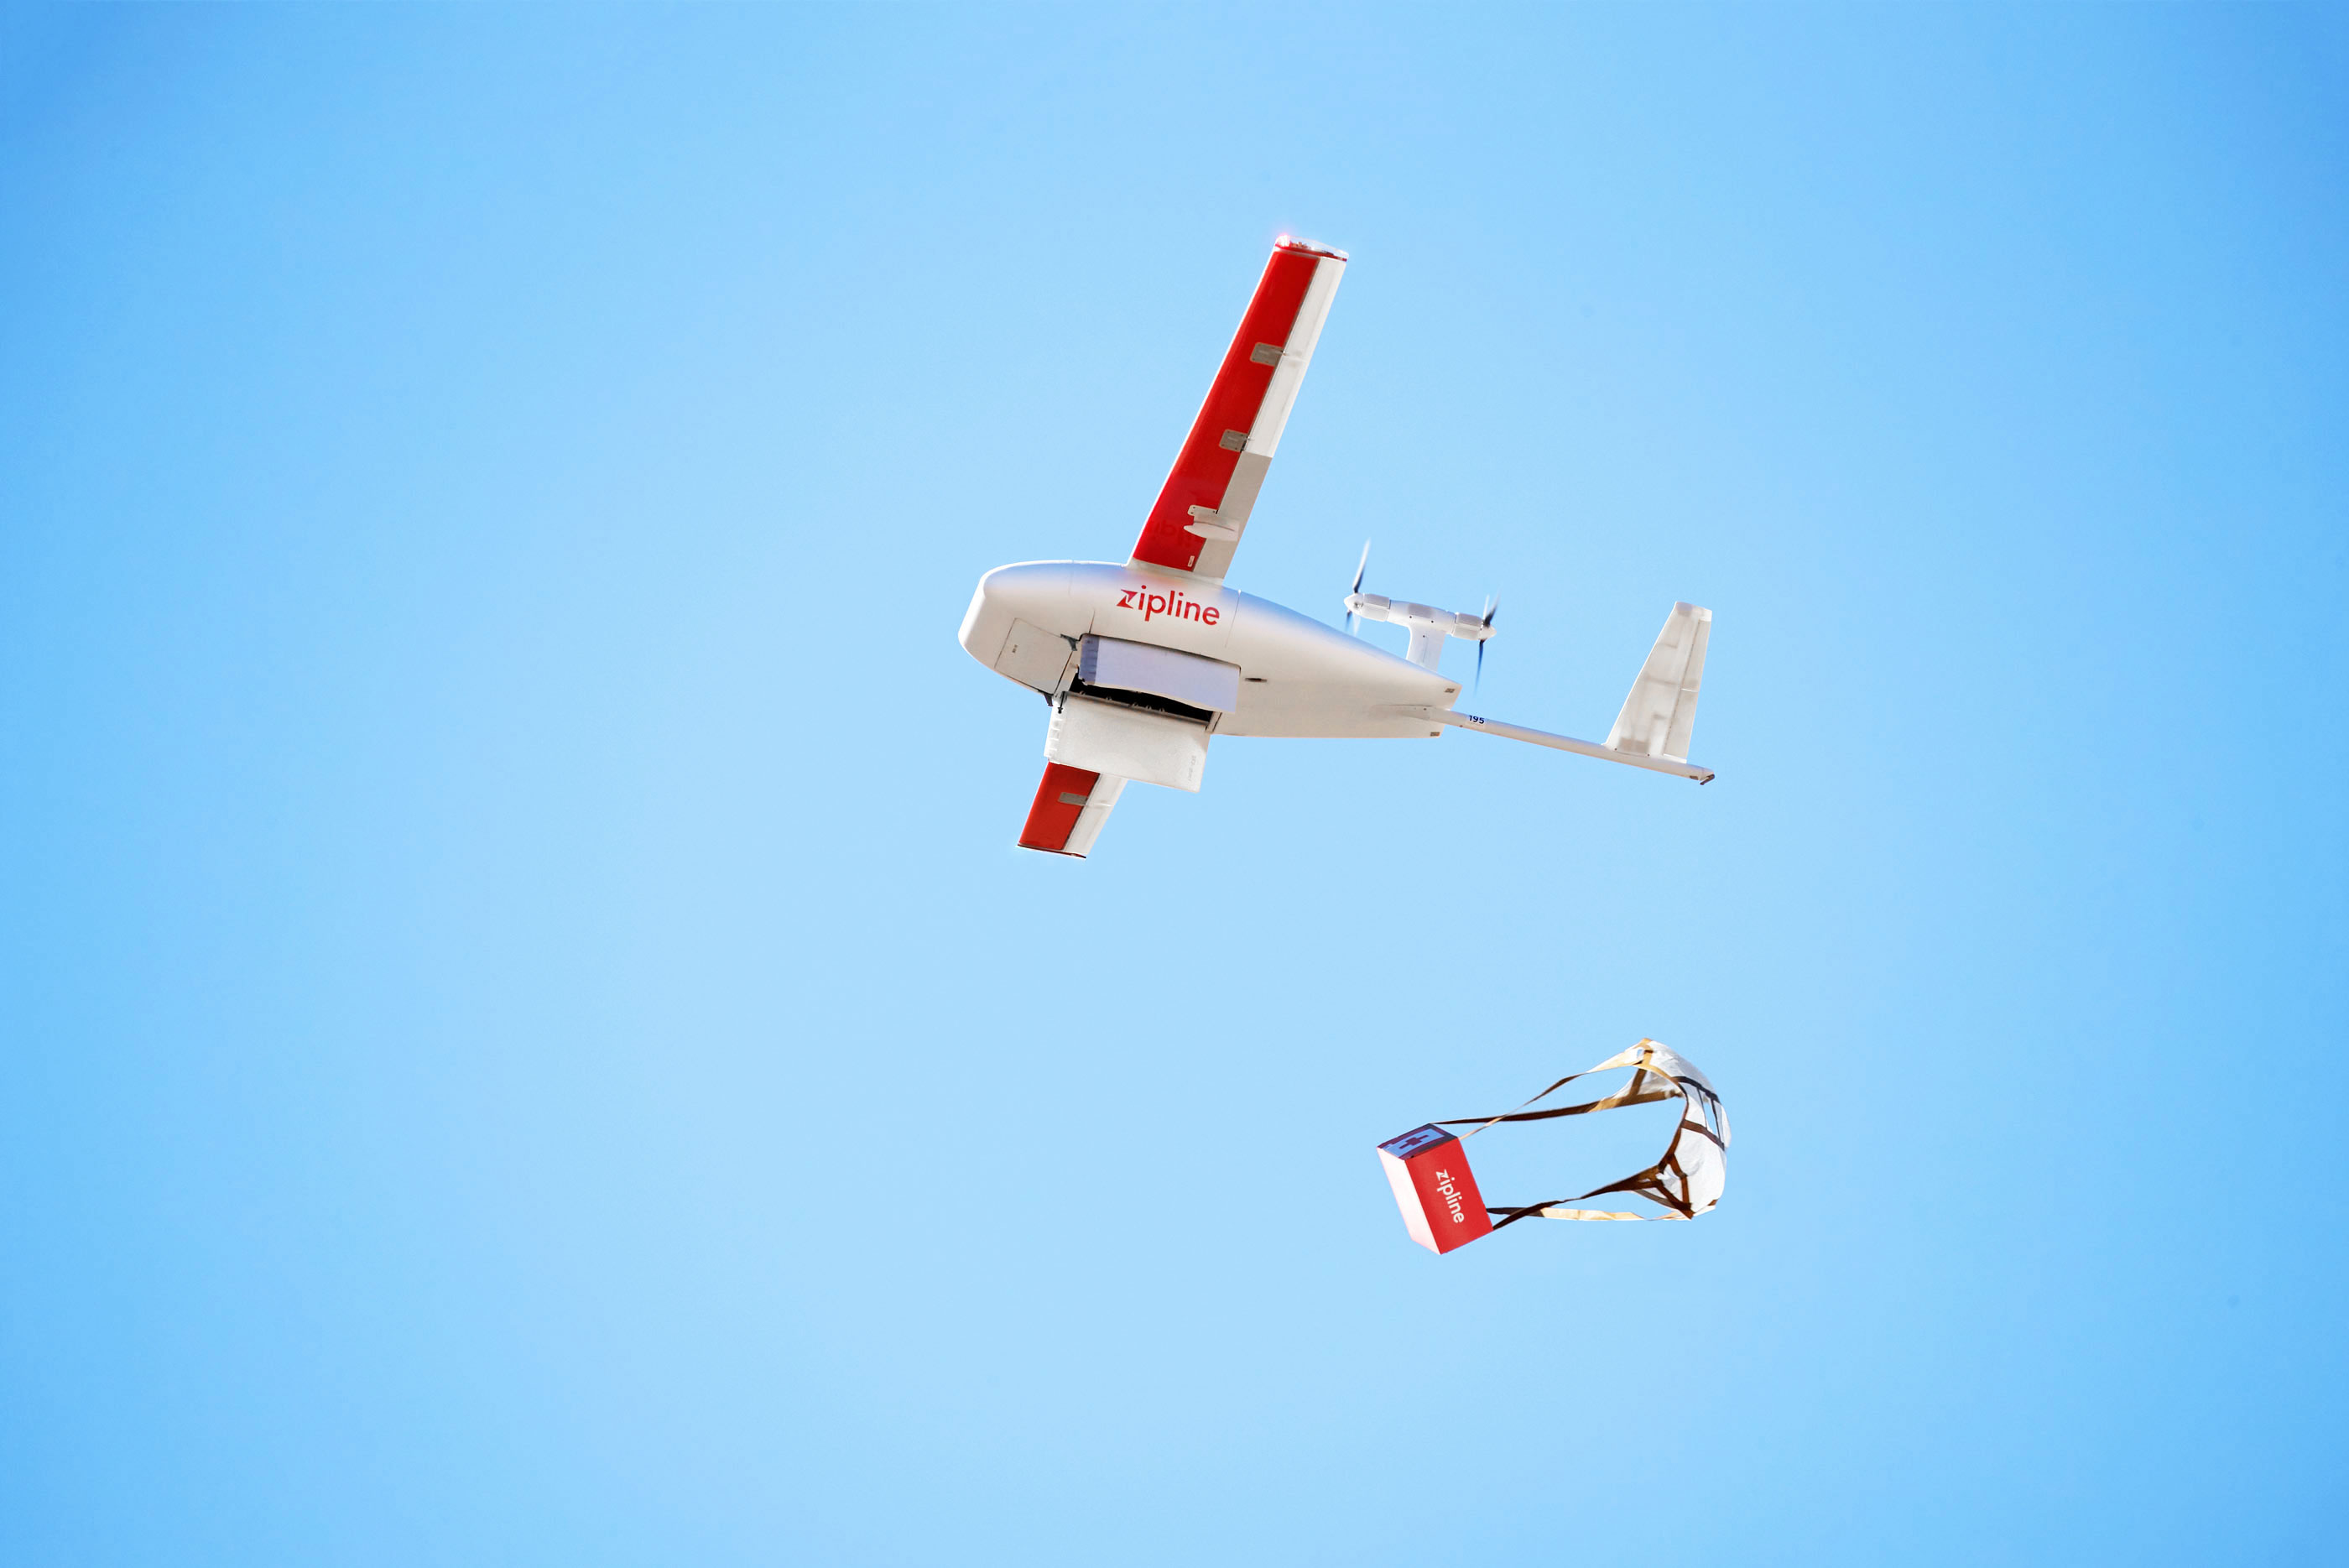 An image of a Zipline airplane dropping a parachuted box